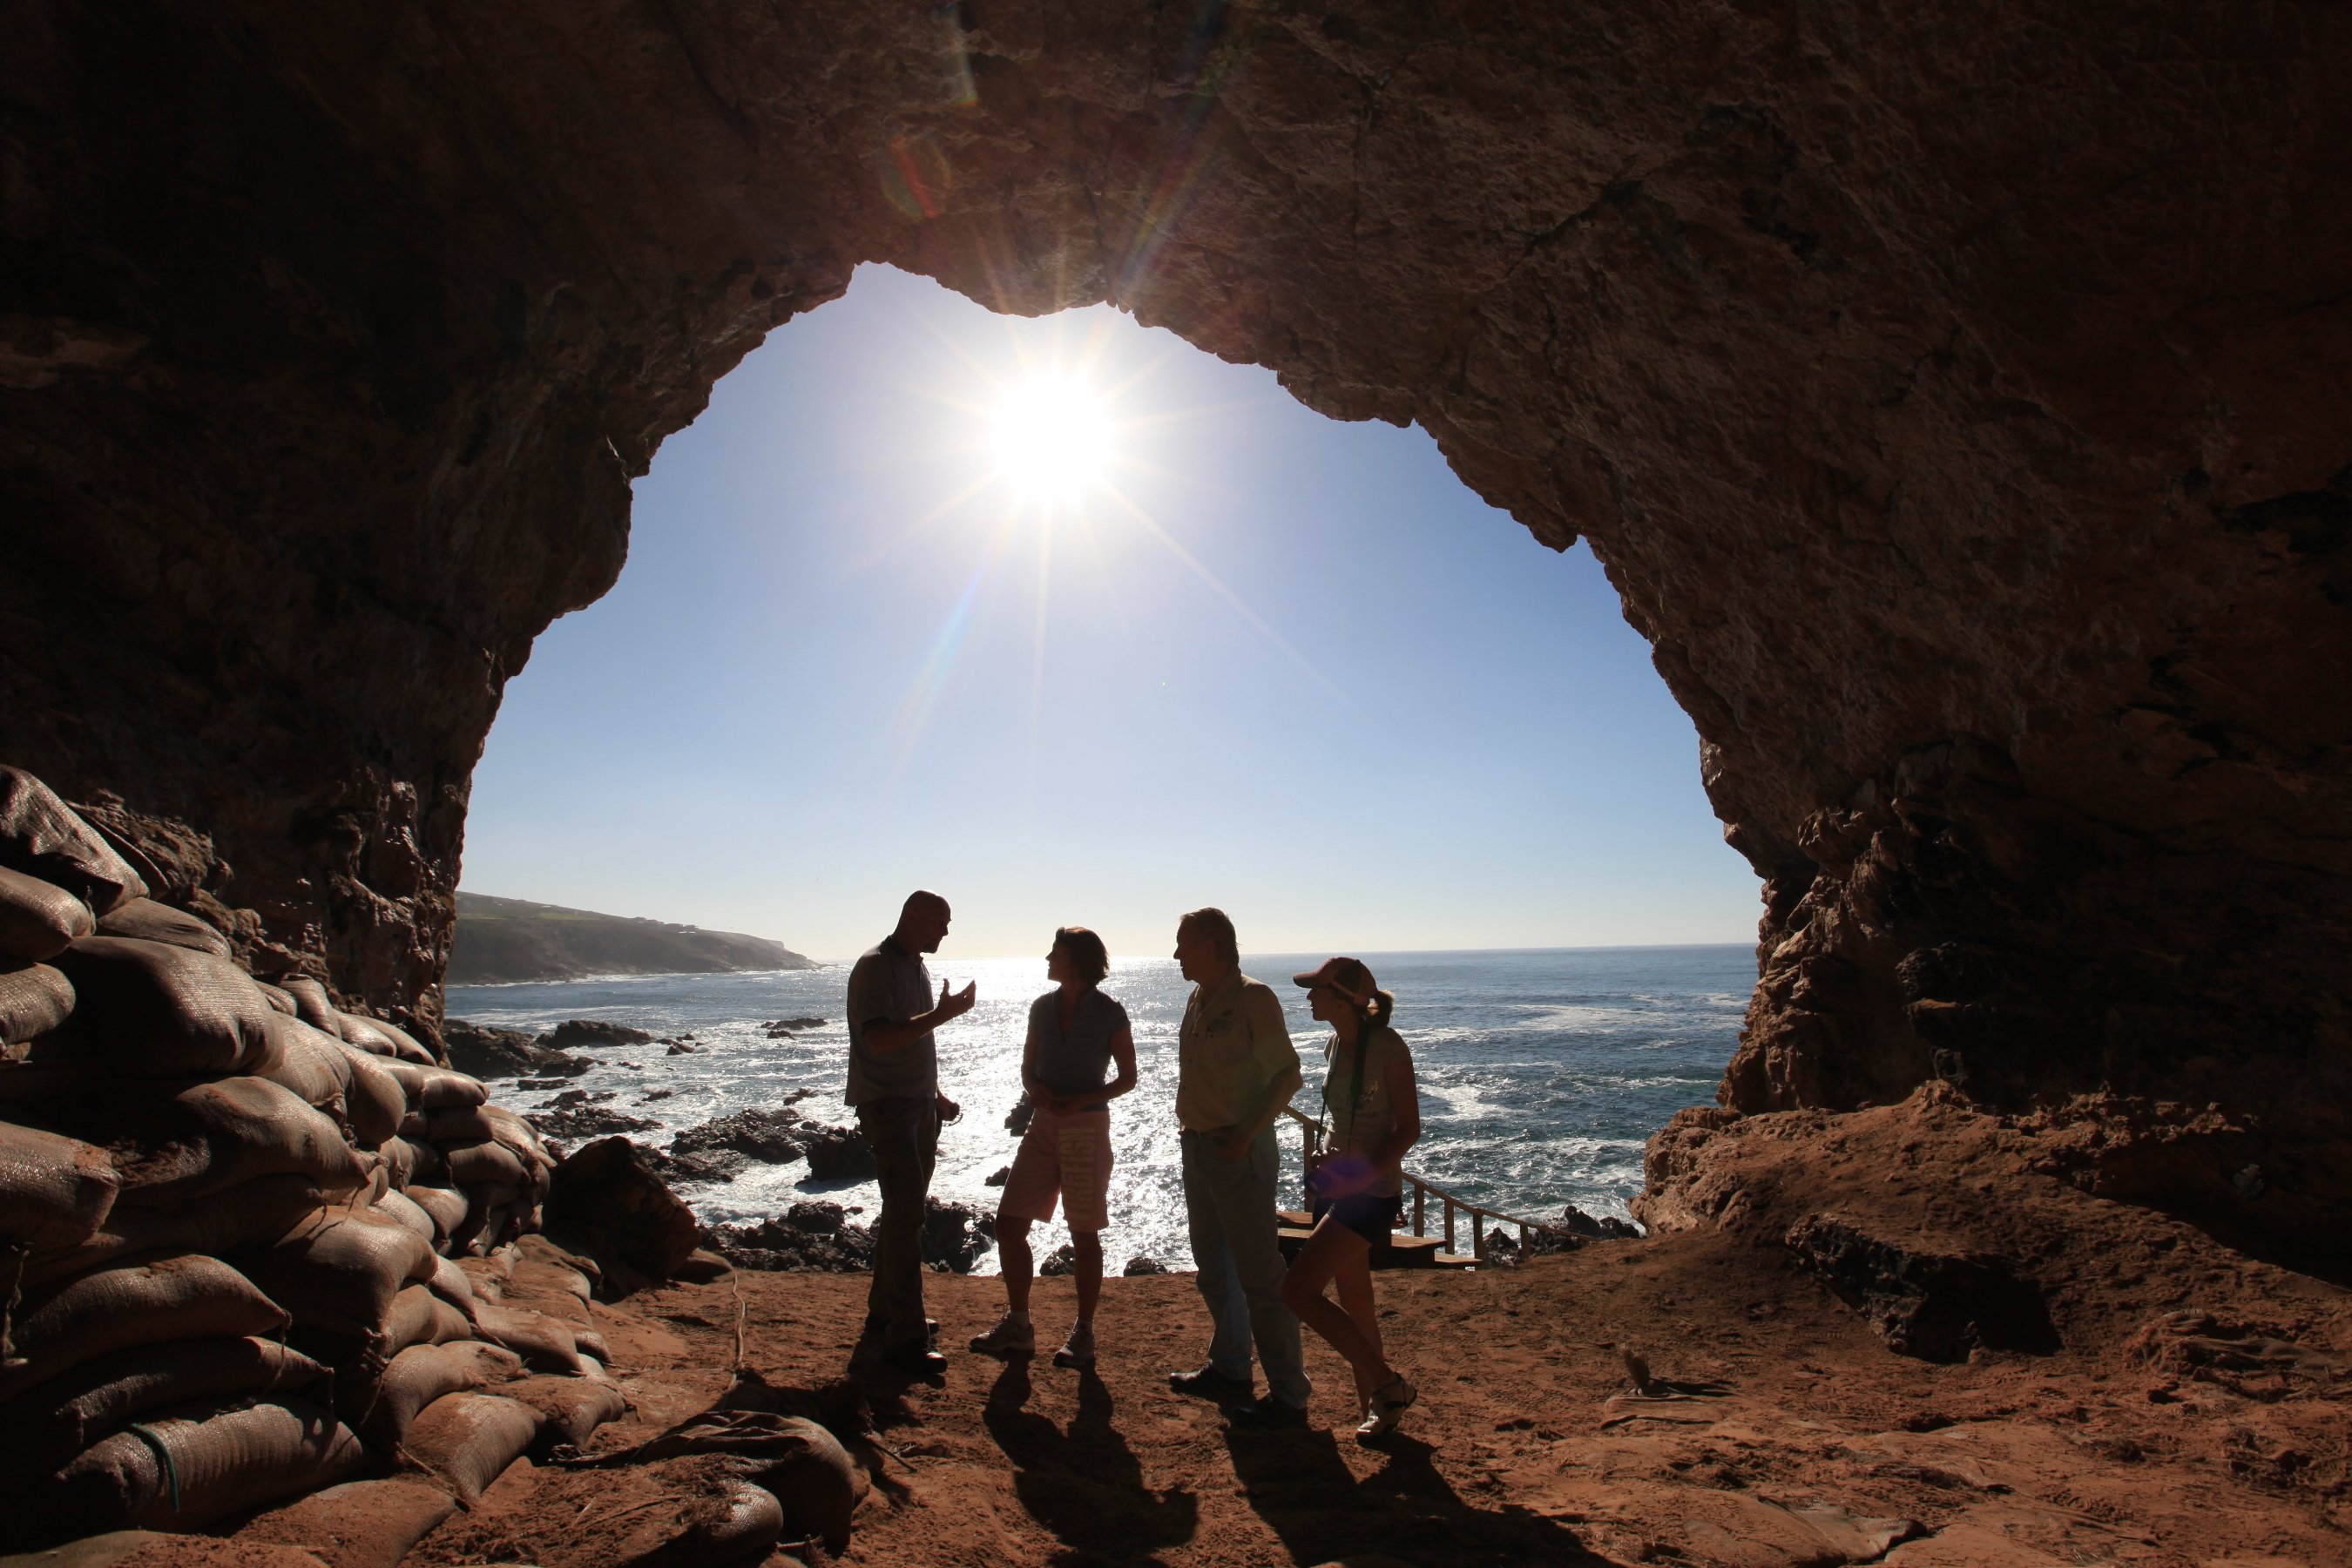 The Place of Human Origins, Mossel Bay